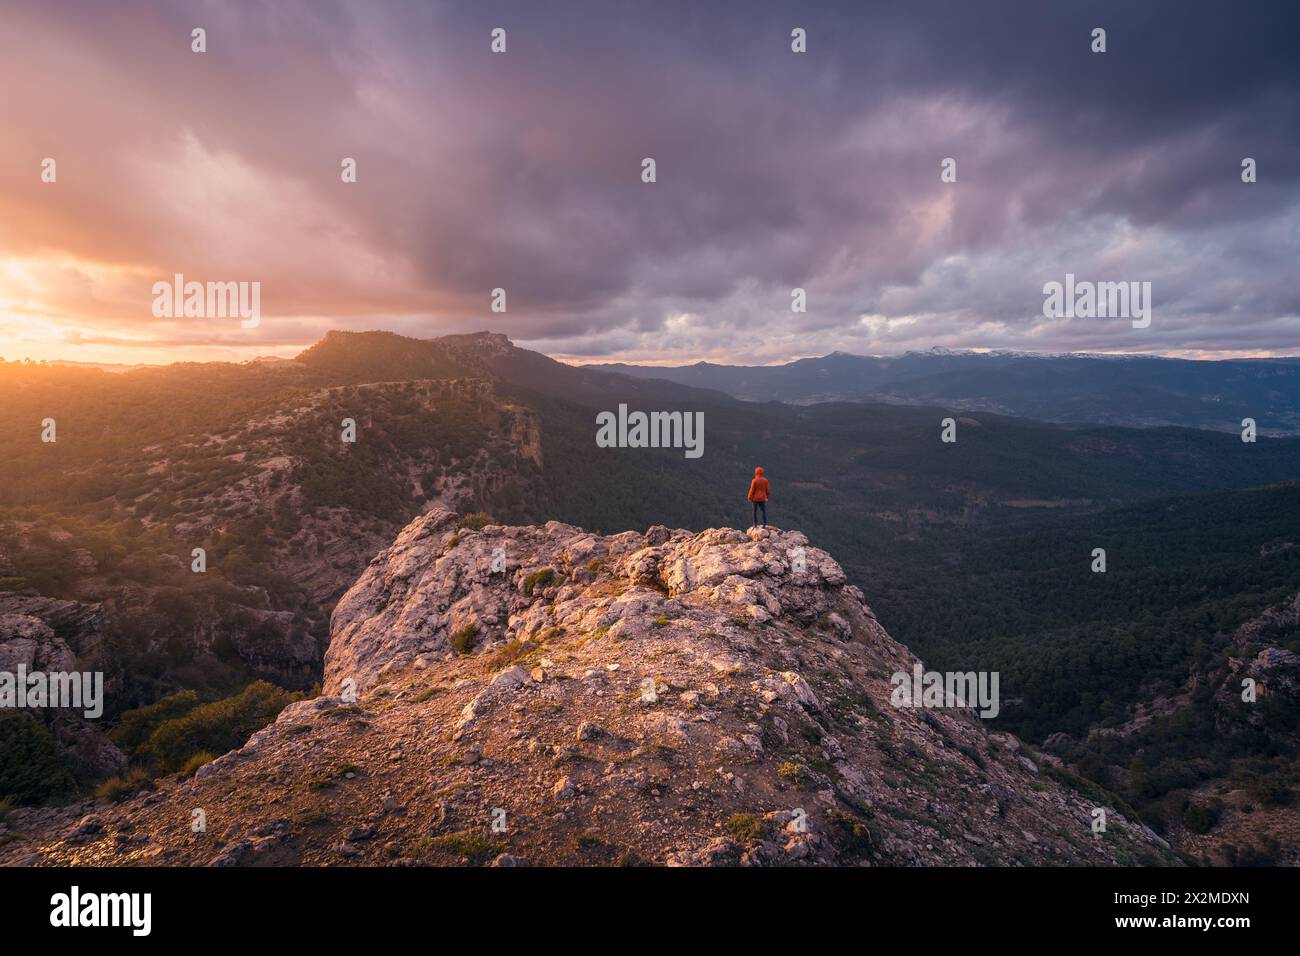 Lone hiker stands atop a mountain at sunset overlooking the vast scenic landscape of Rio Mundo, with dramatic clouds and soft light illuminating the h Stock Photo